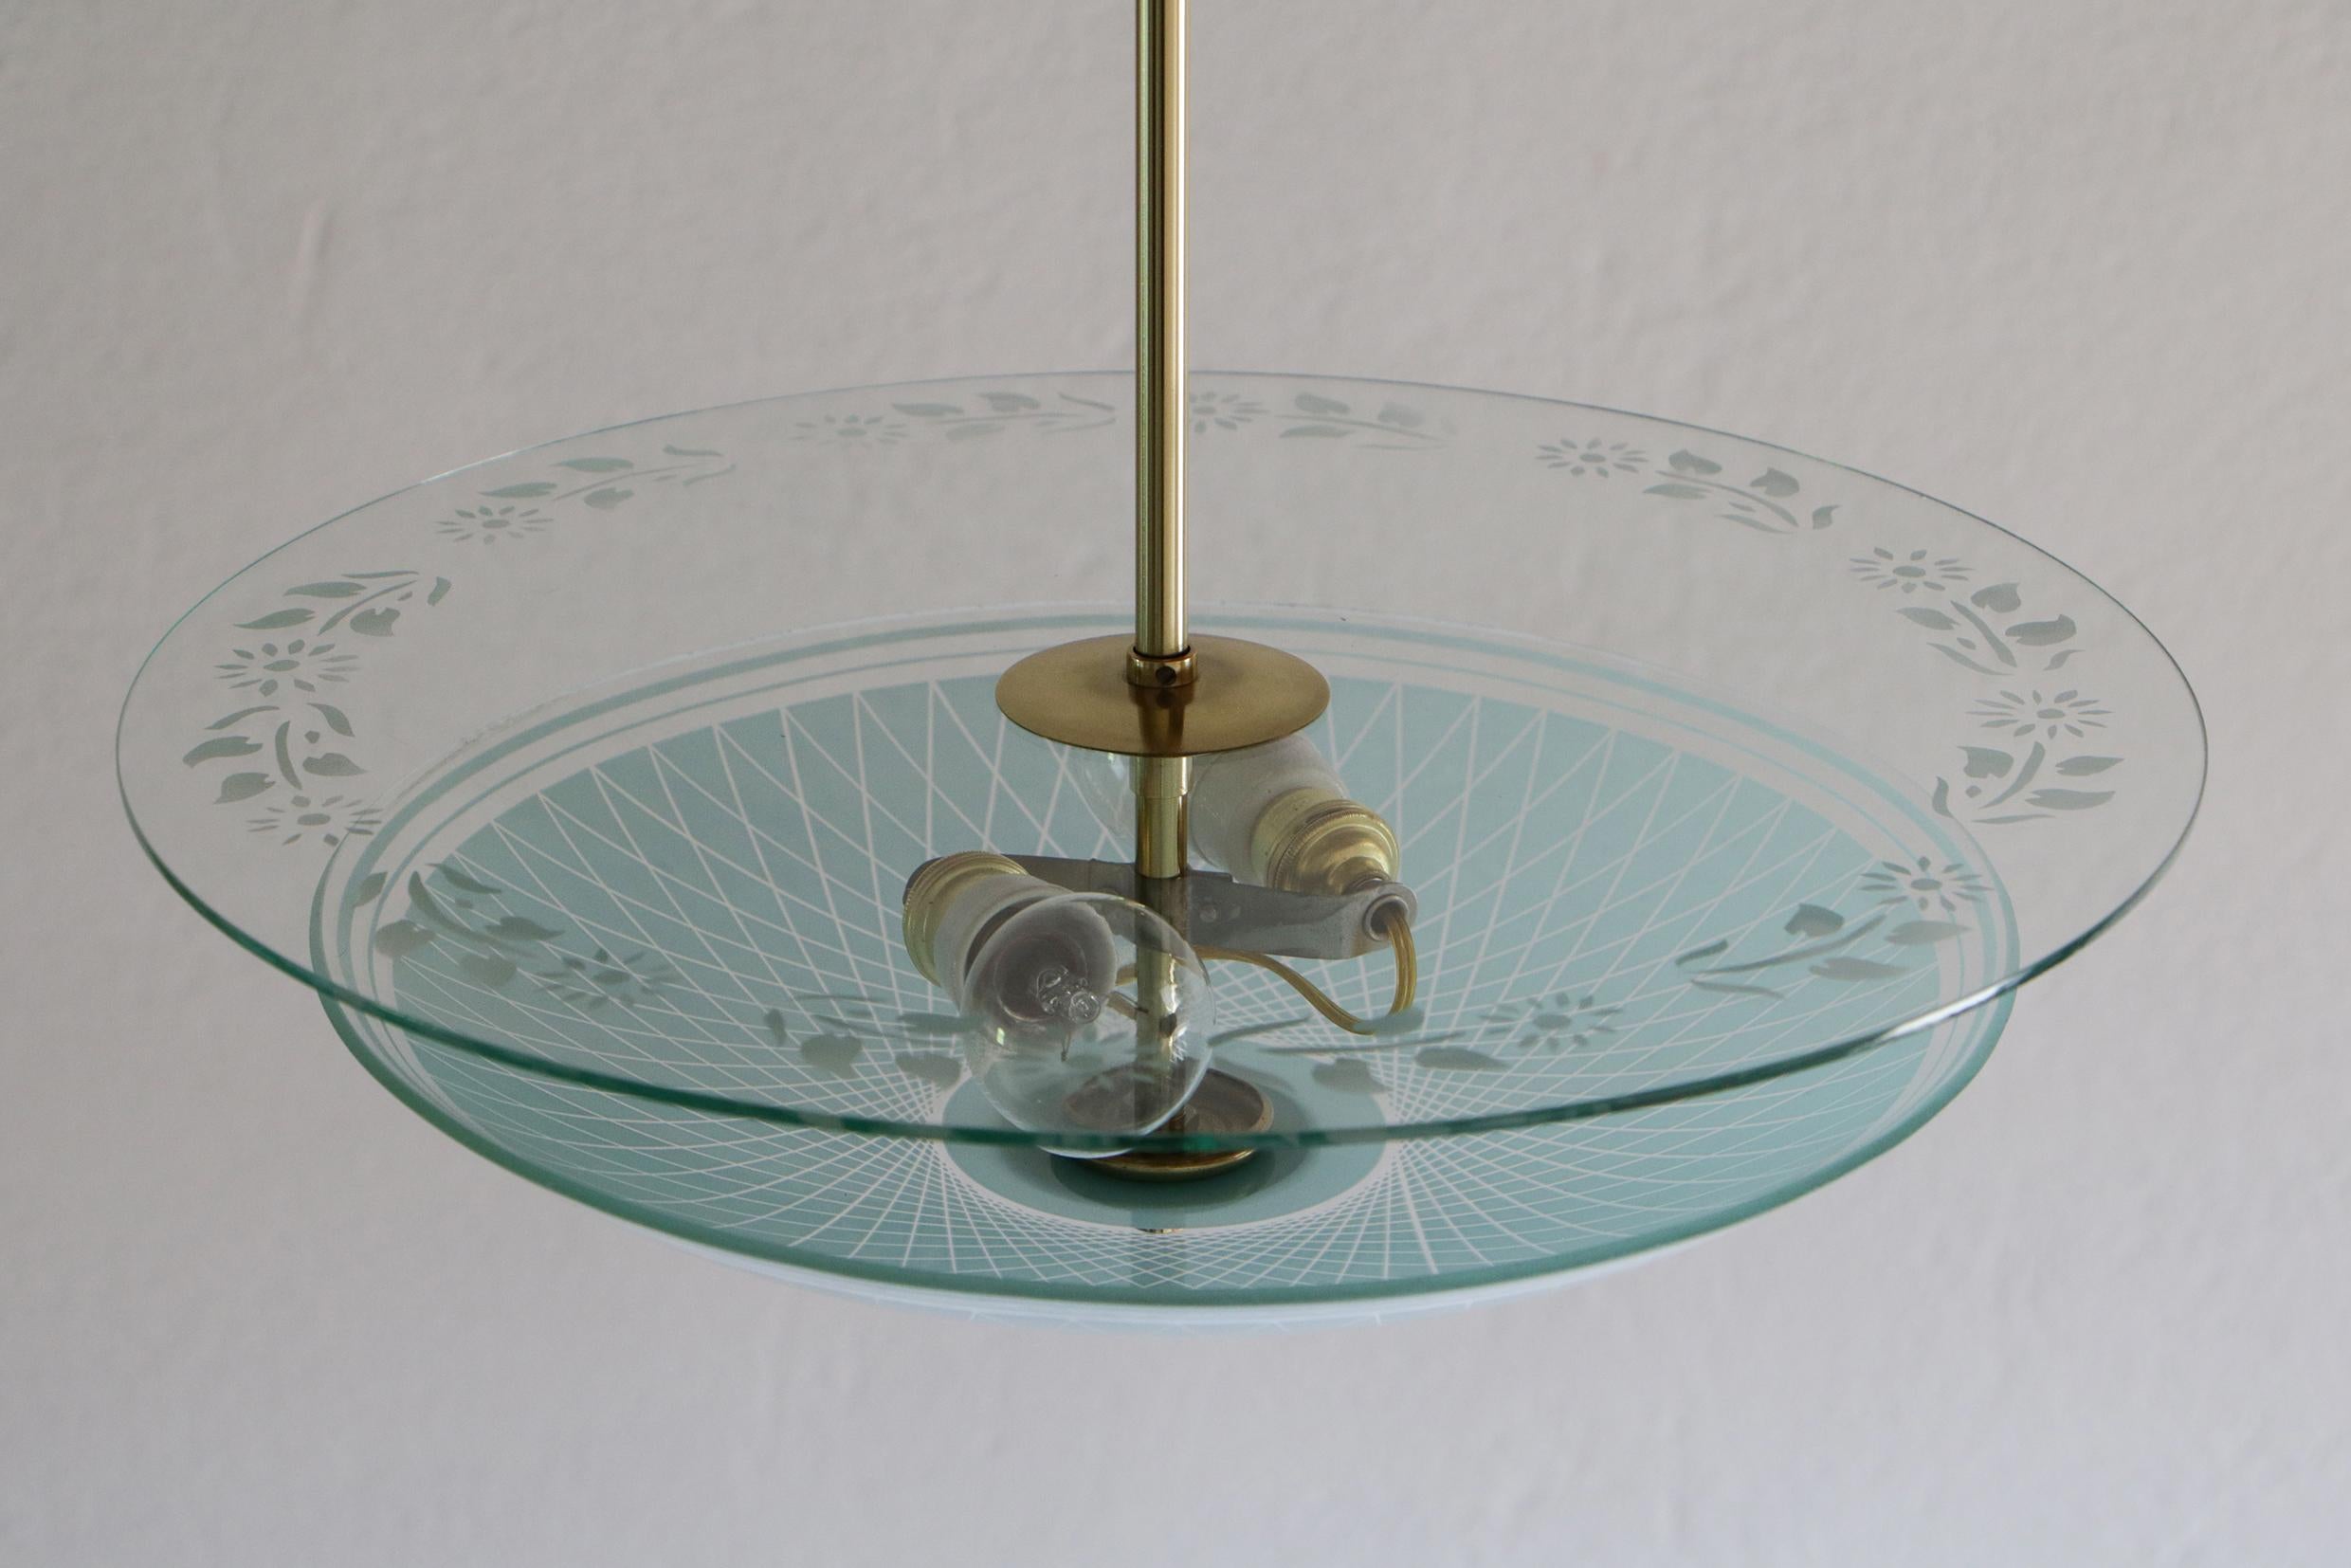 Italian Mid-Century Double Disc Pendant Lamp in Turquoise Color, 1950s In Good Condition For Sale In Traversetolo, IT